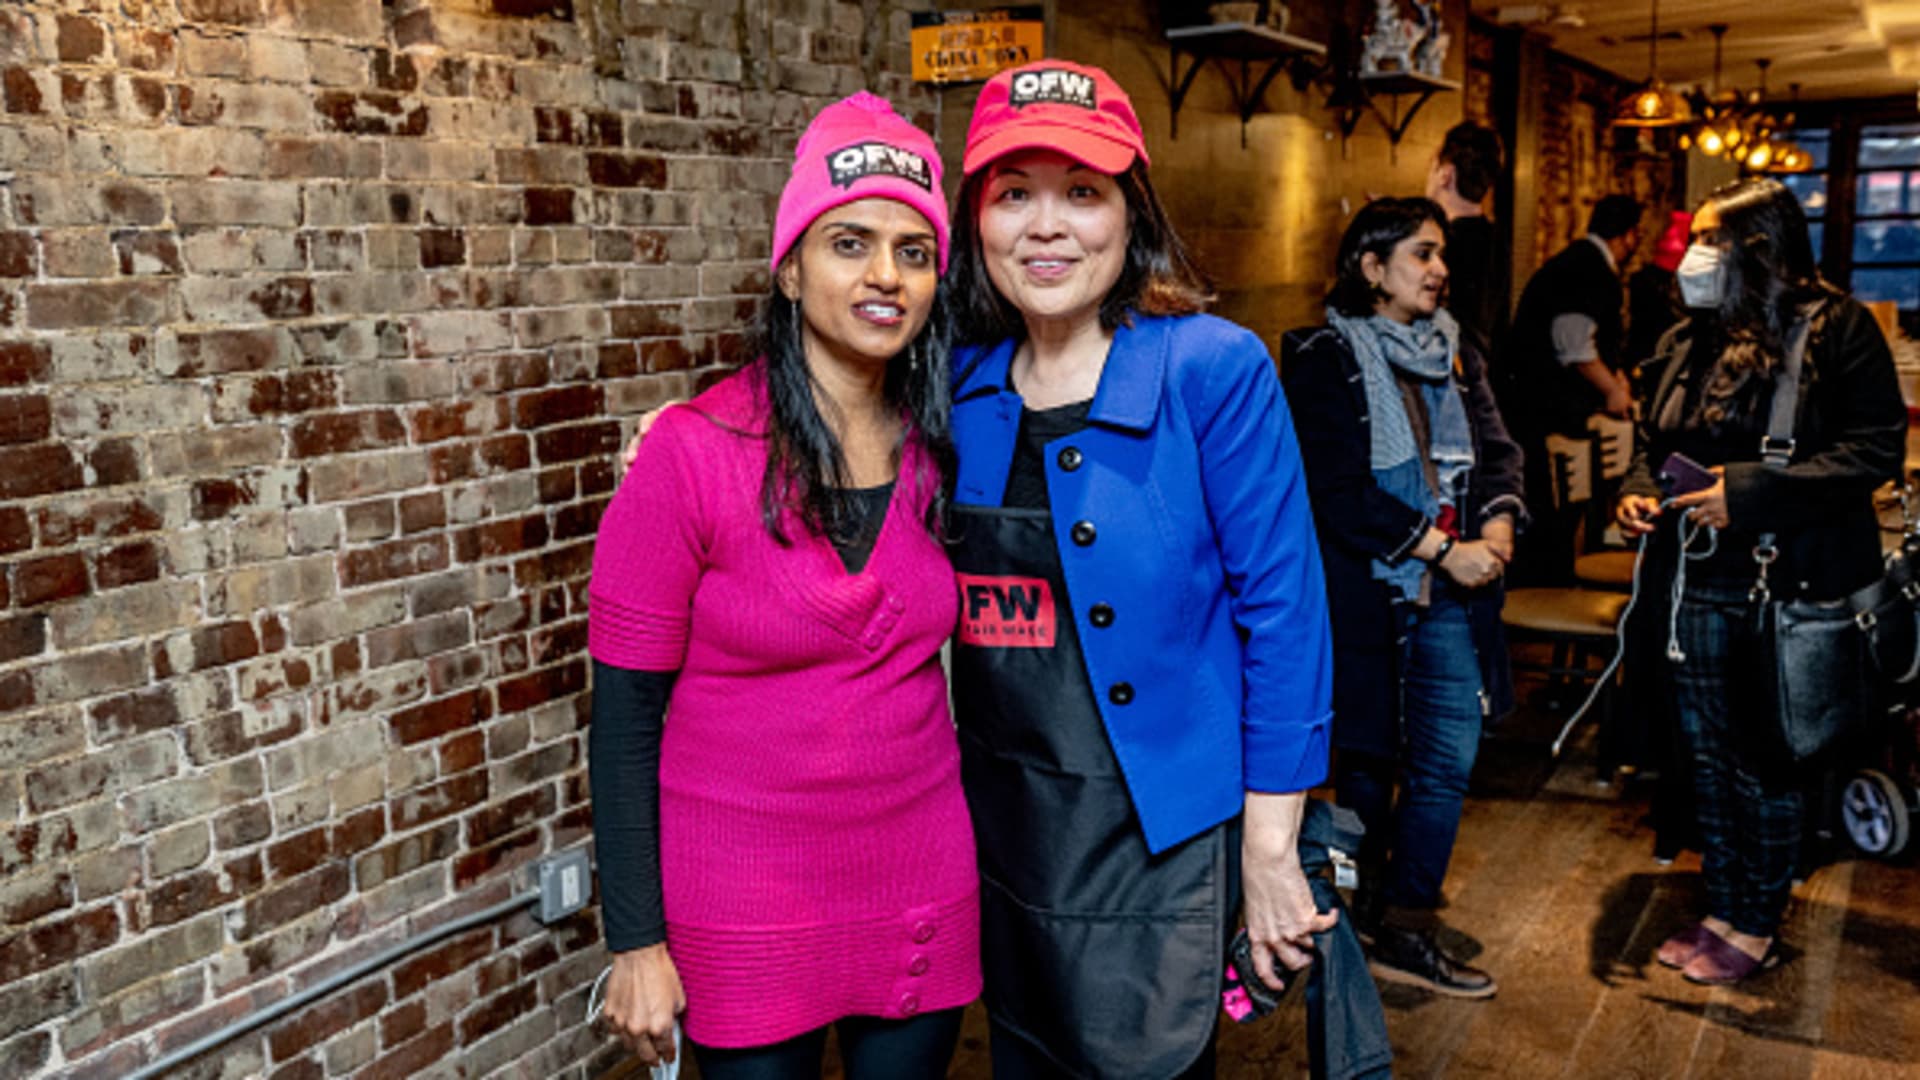 President of One Fair Wage Saru Jayaraman with Deputy Labor Secretary Julie Su during a Learn About Worker Experiences event at the Baodega restaurant in the Flat Iron district on April 11, 2022 in New York City.